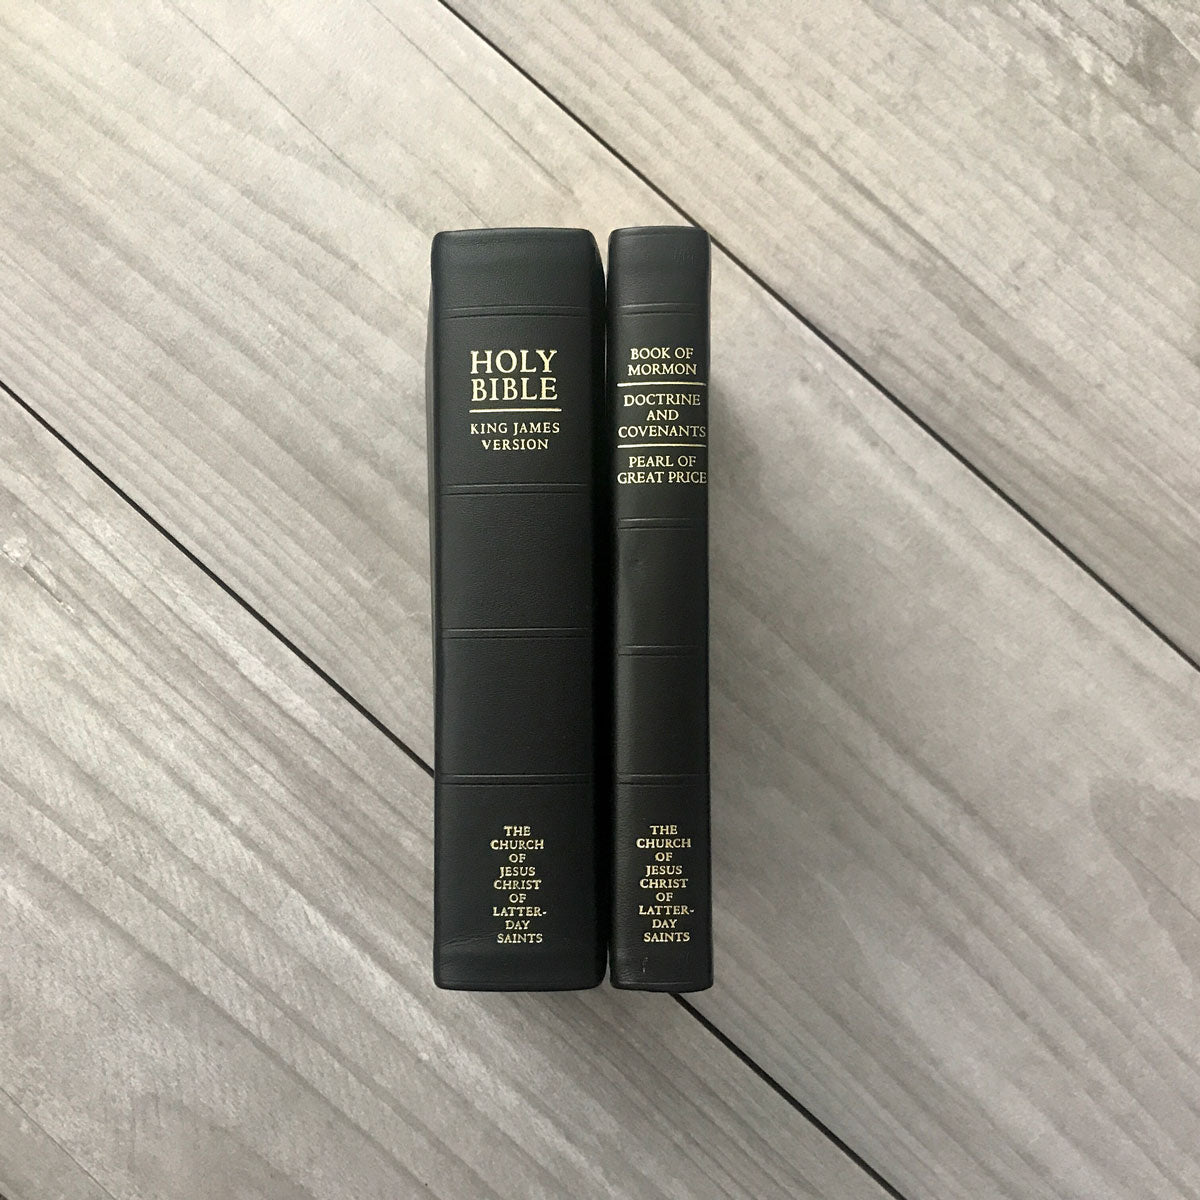 Customizable bible and triple combination by Jessie Anne